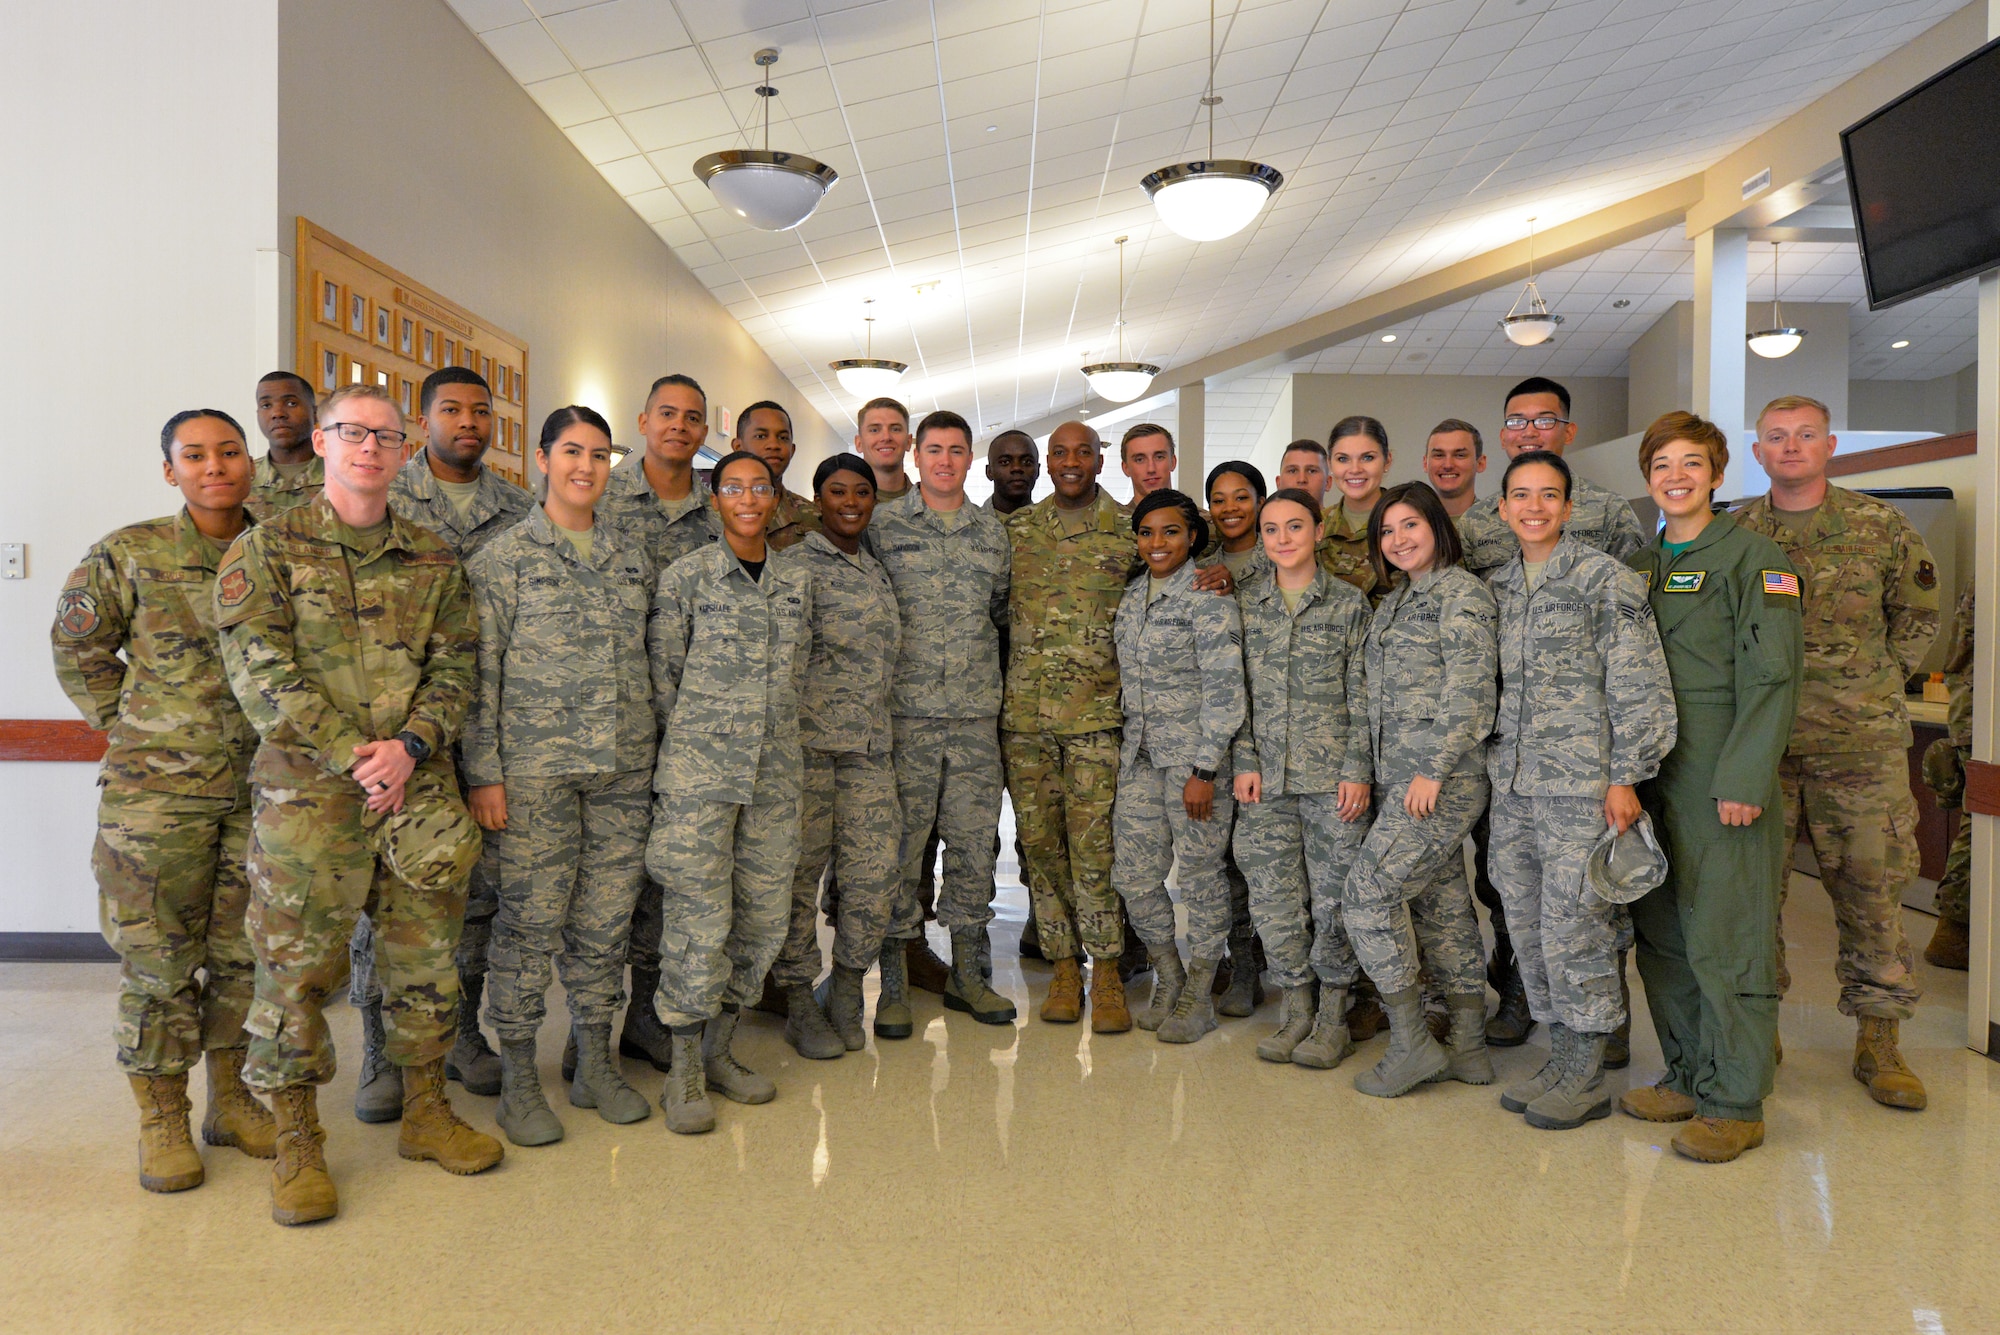 Airman pose for a photo with Chief Wright